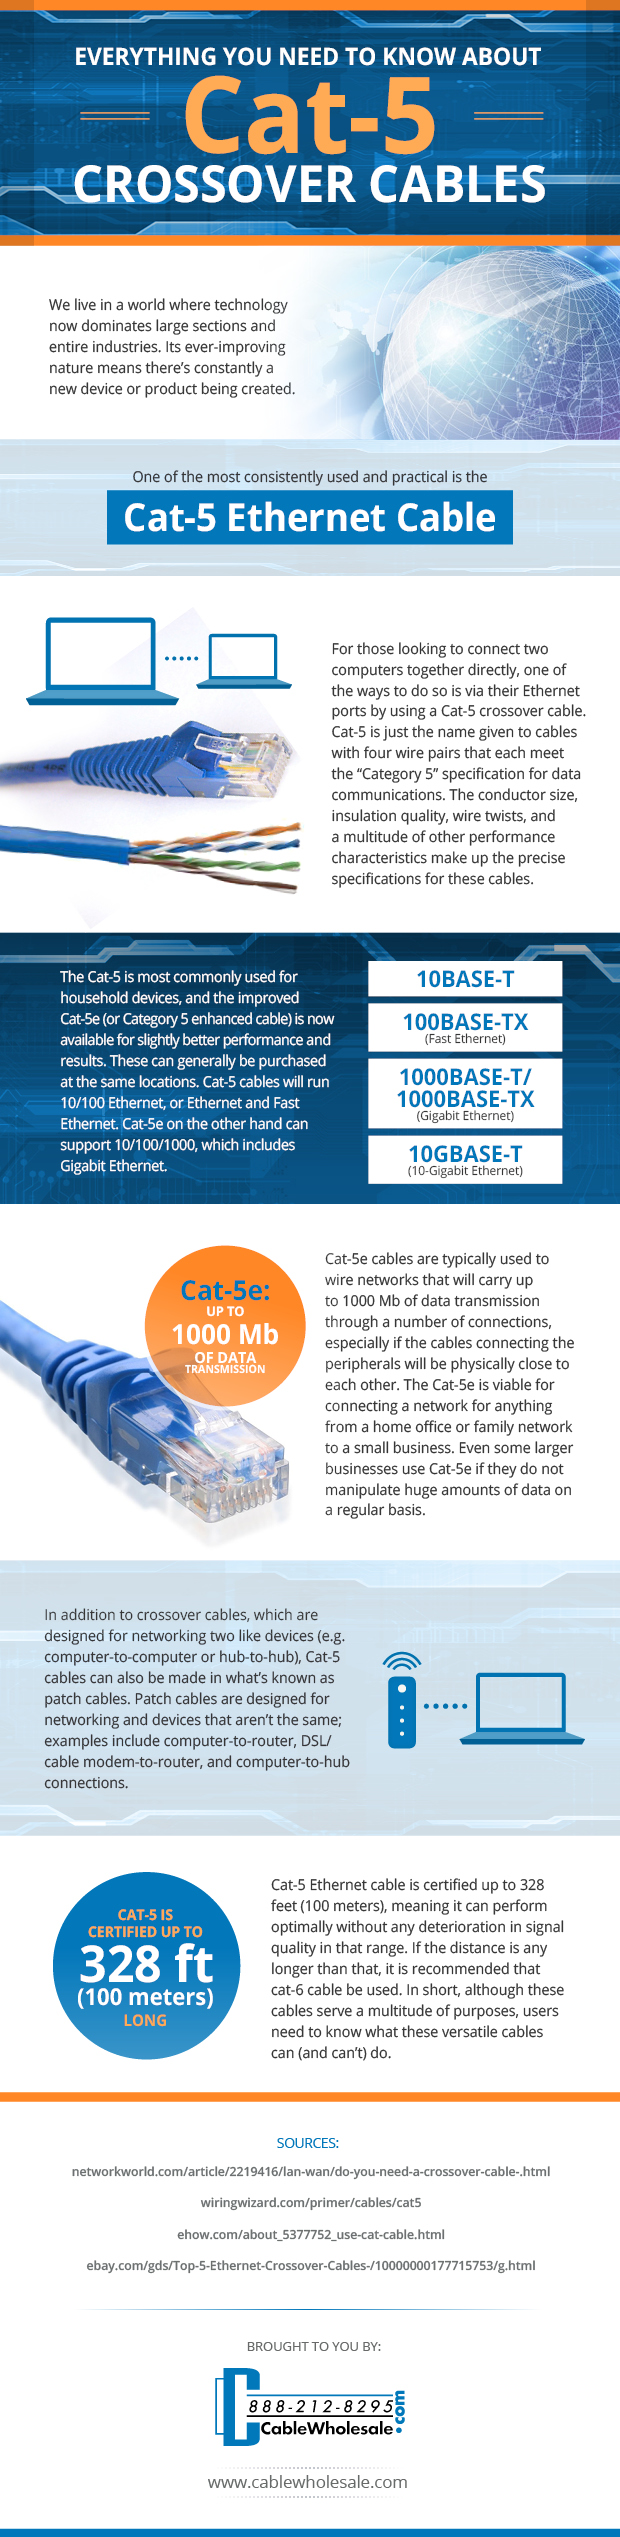 Everything You Need to Know About the Cat-5 Crossover Cable